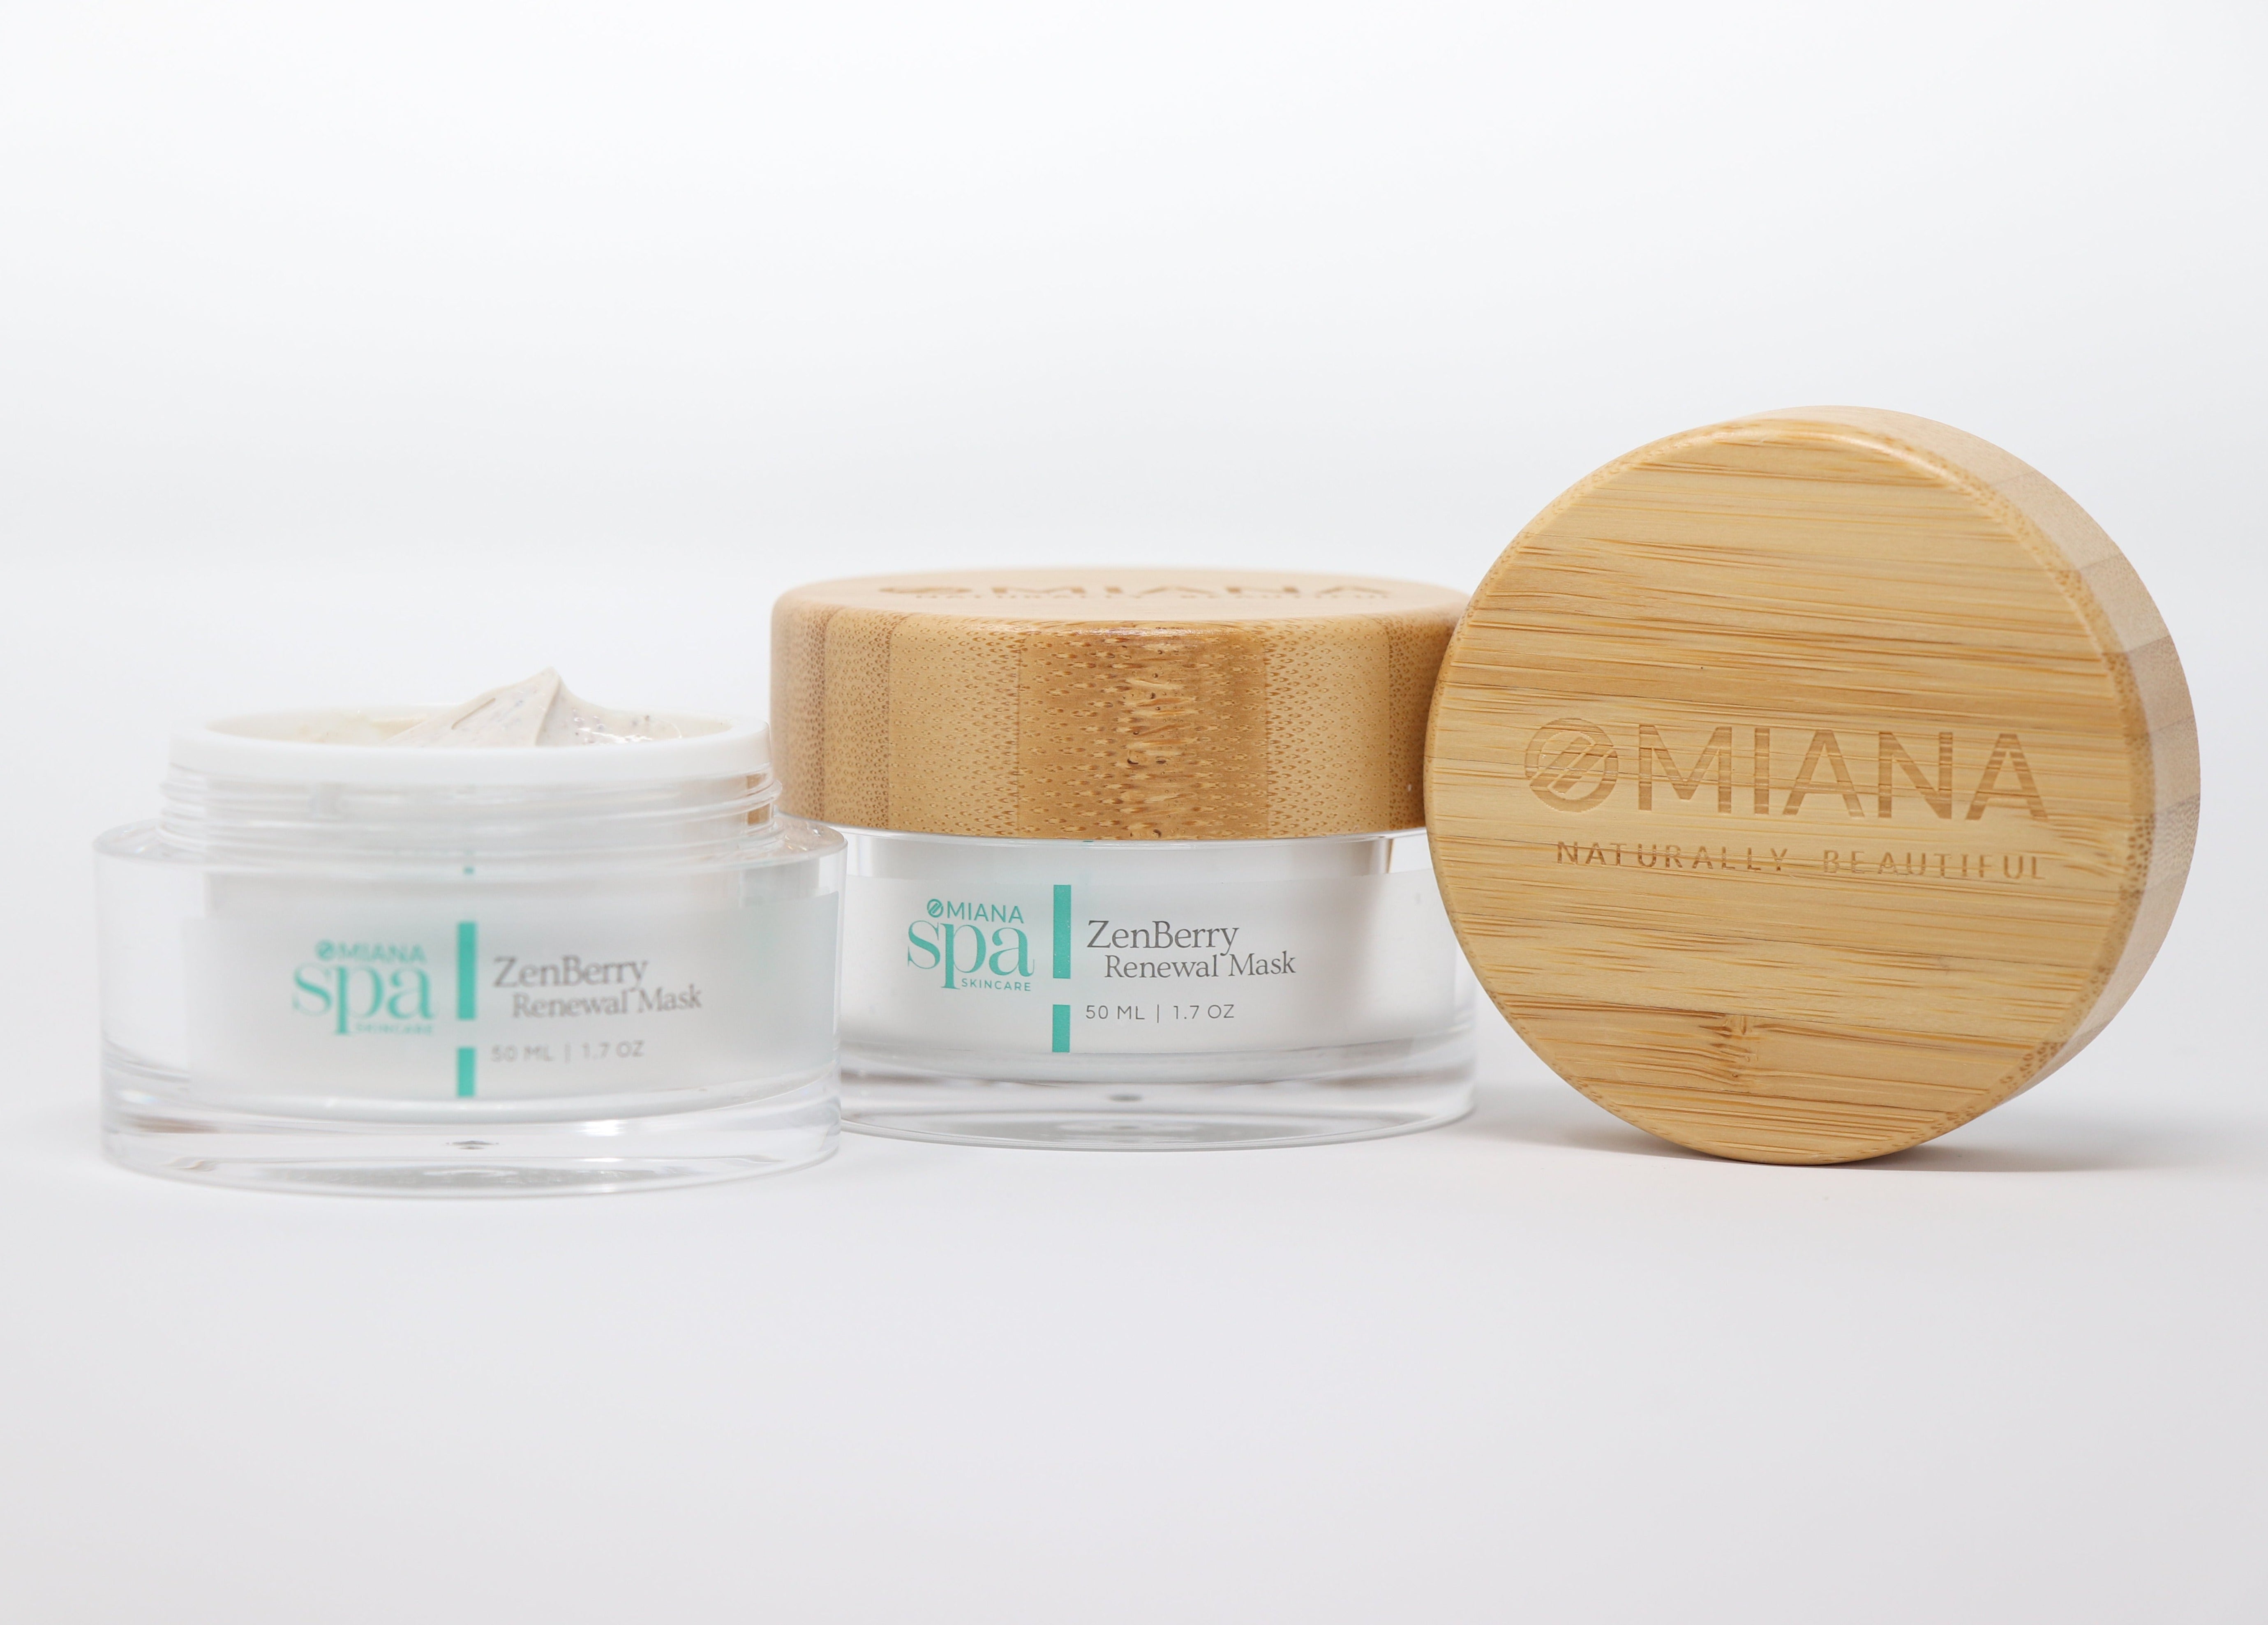 ZenBerry Renewal Mask - 100% Free From GMOs, Toxins, Artificial Fragrances, & More by Omiana